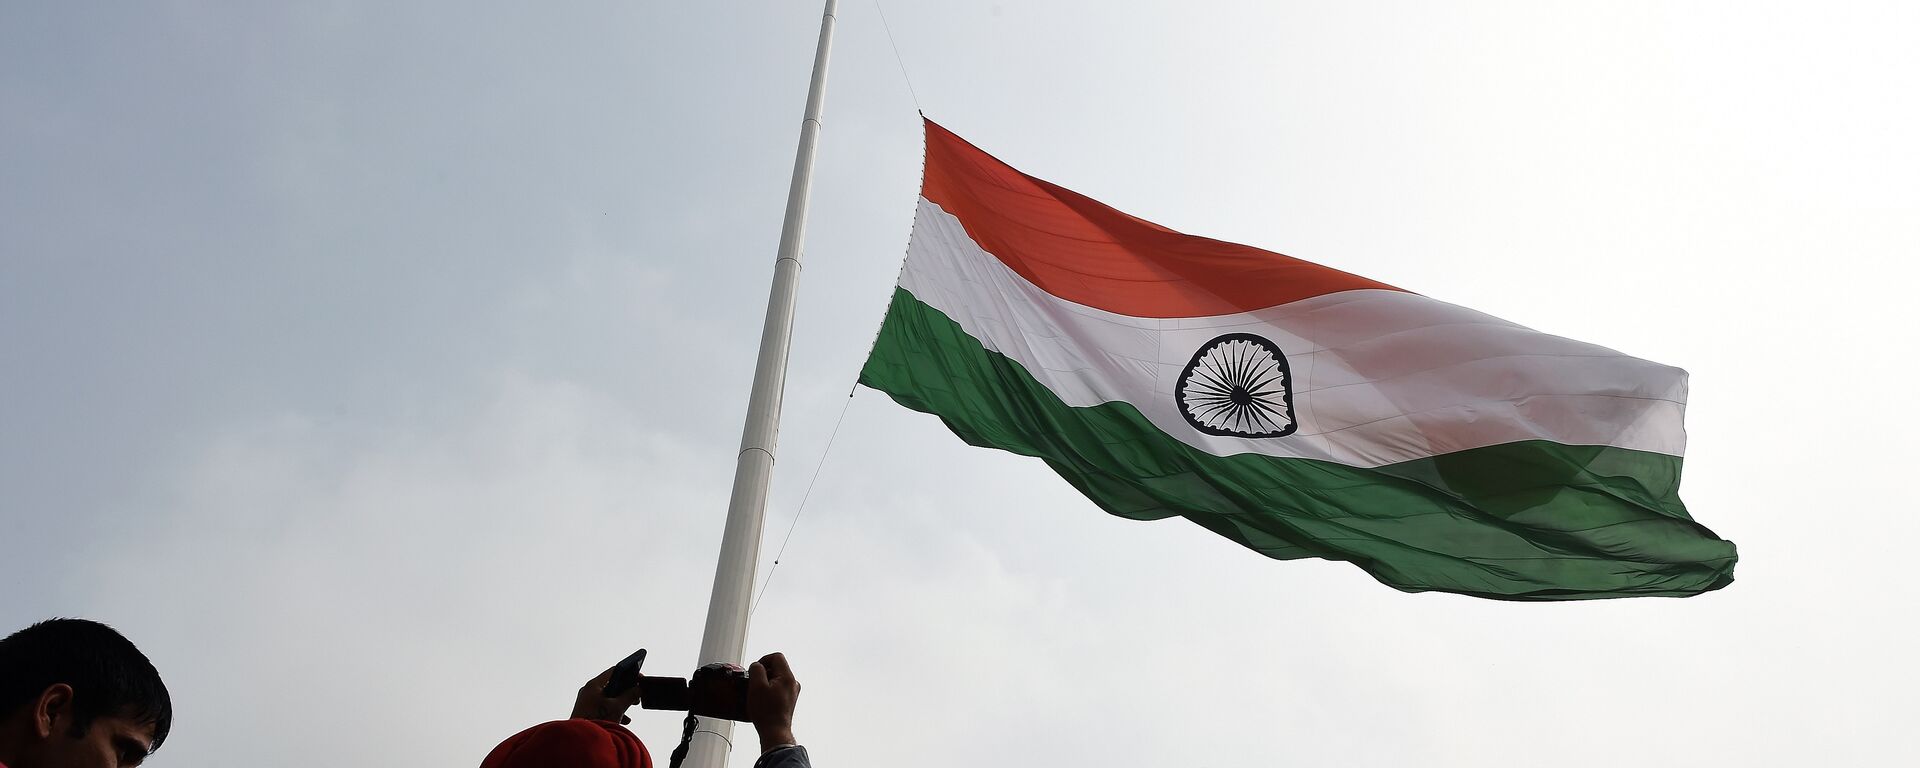 Indian residents photograph India's tallest flag as it is unveiled in Faridabad on the outskirts of New Delhi on March 3, 2015 - Sputnik International, 1920, 29.05.2021